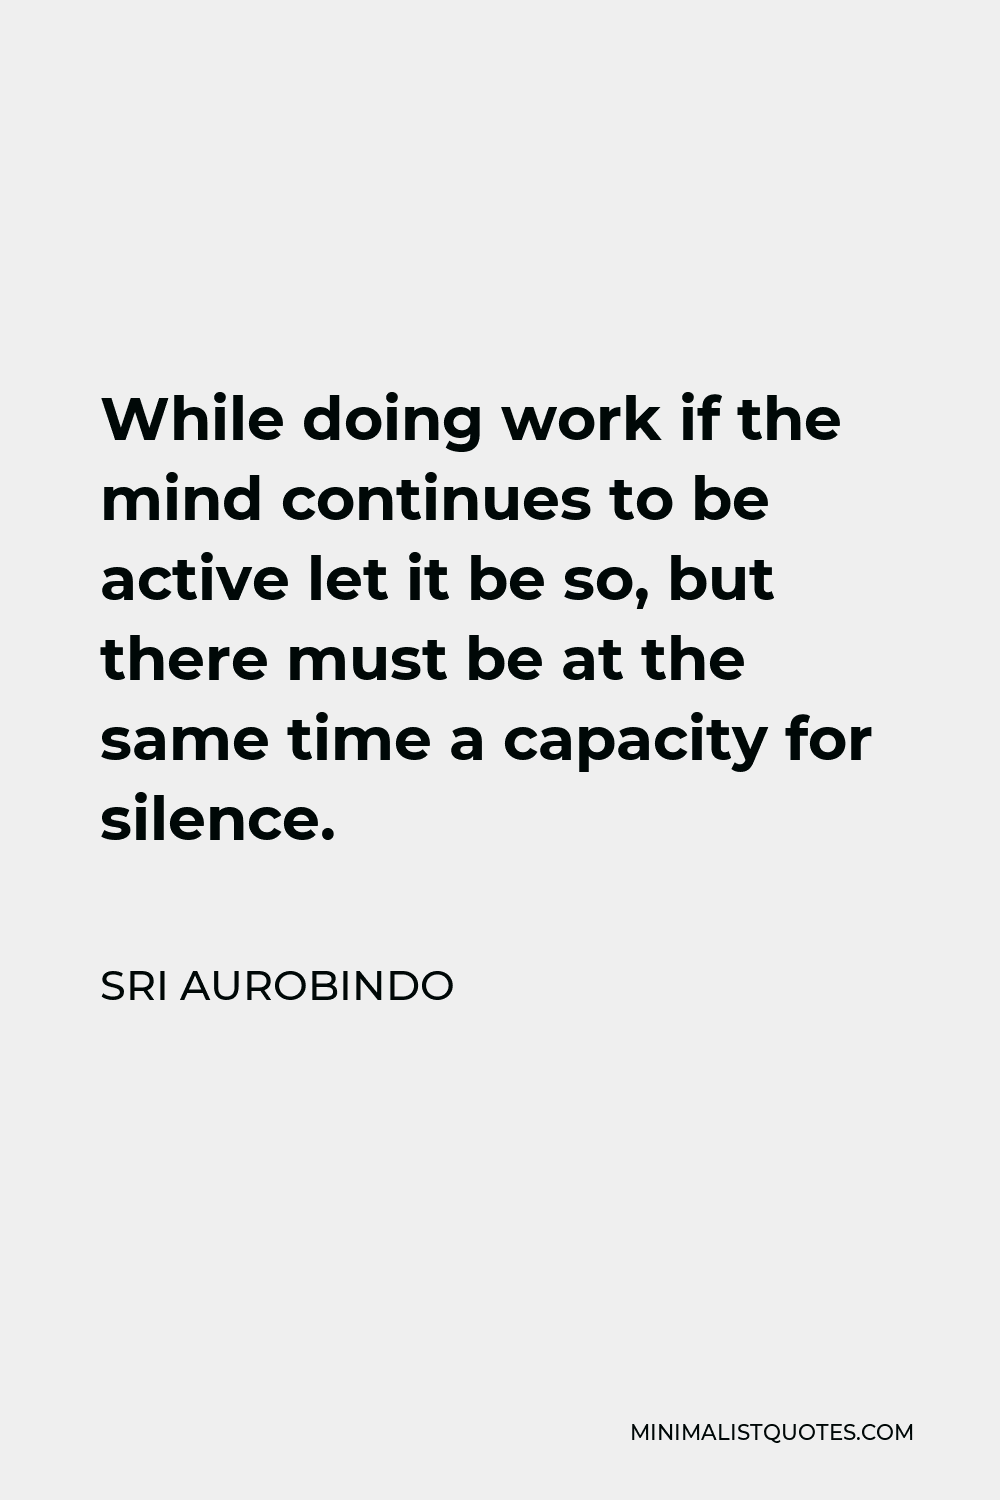 Sri Aurobindo Quote - While doing work if the mind continues to be active let it be so, but there must be at the same time a capacity for silence.